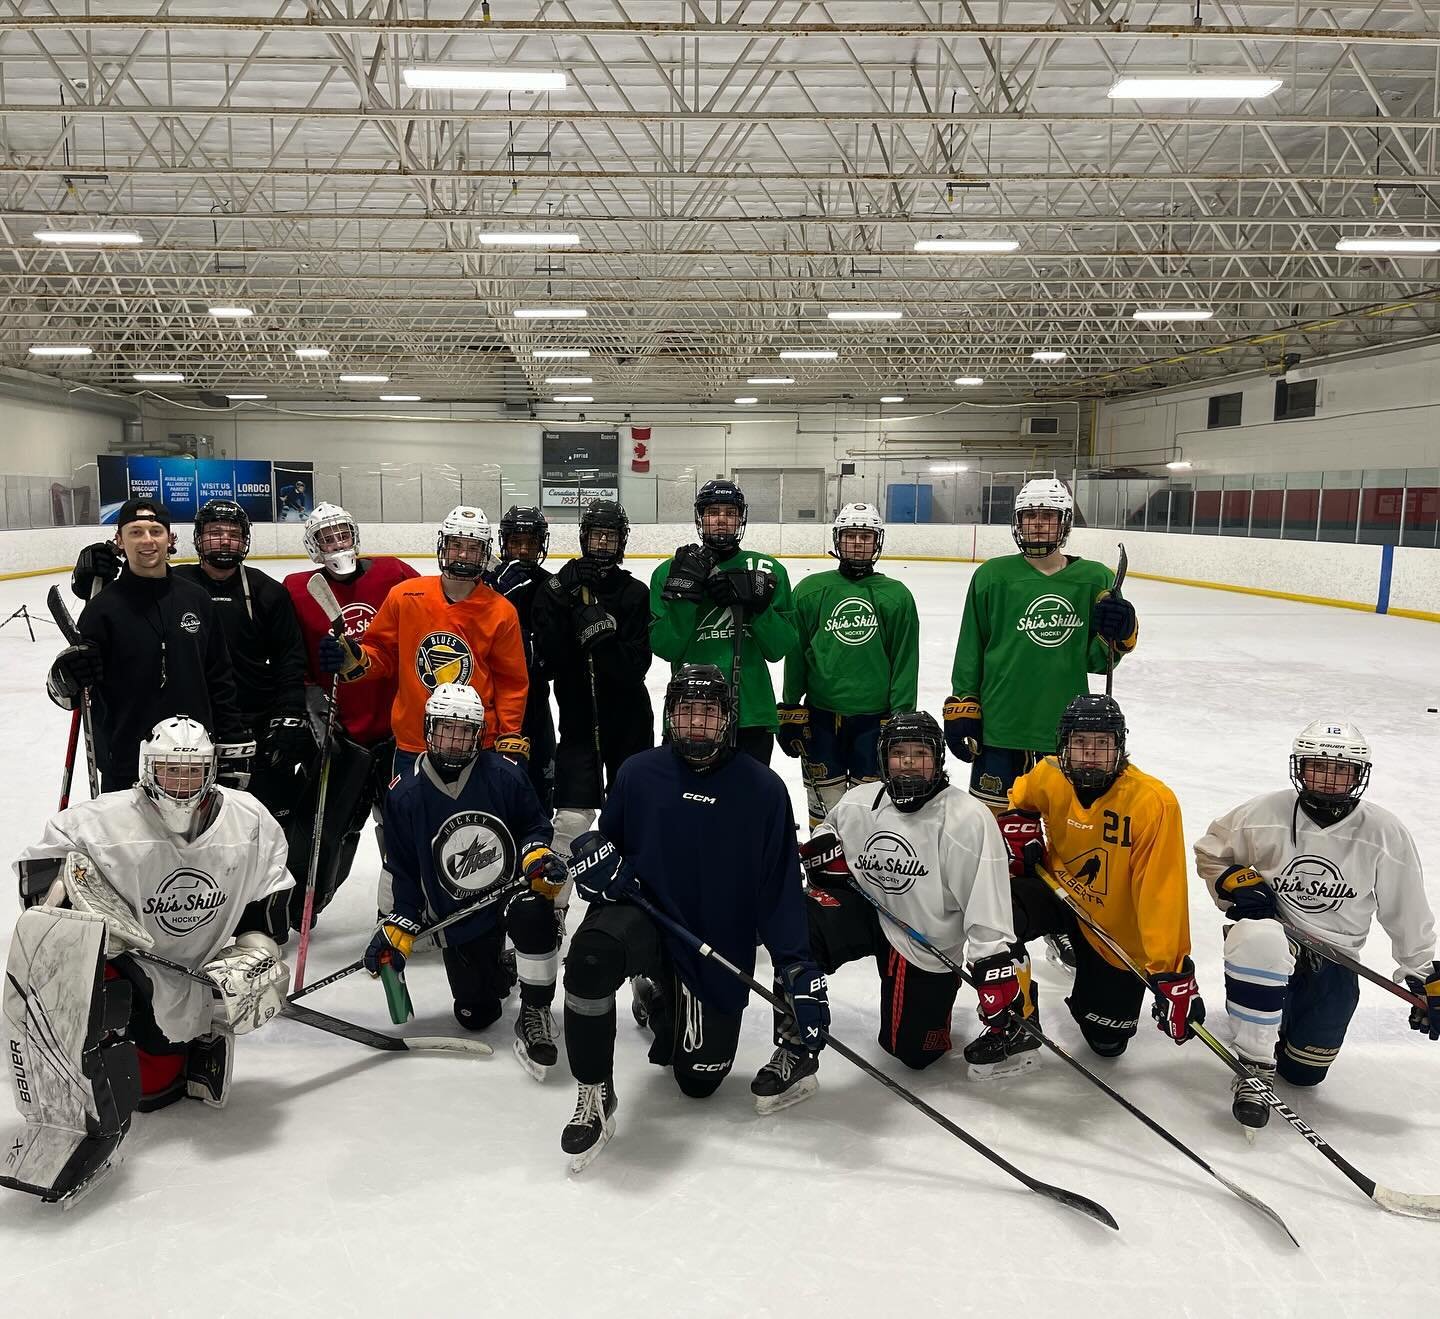 That&rsquo;s a wrap on Ski&rsquo;s Breakfast Club!‼️🏒
-
What a great group of athletes I had the pleasure of working with every Monday morning! Not always easy to get up so early and put in some work on a Monday, so I applaud this group for their ha